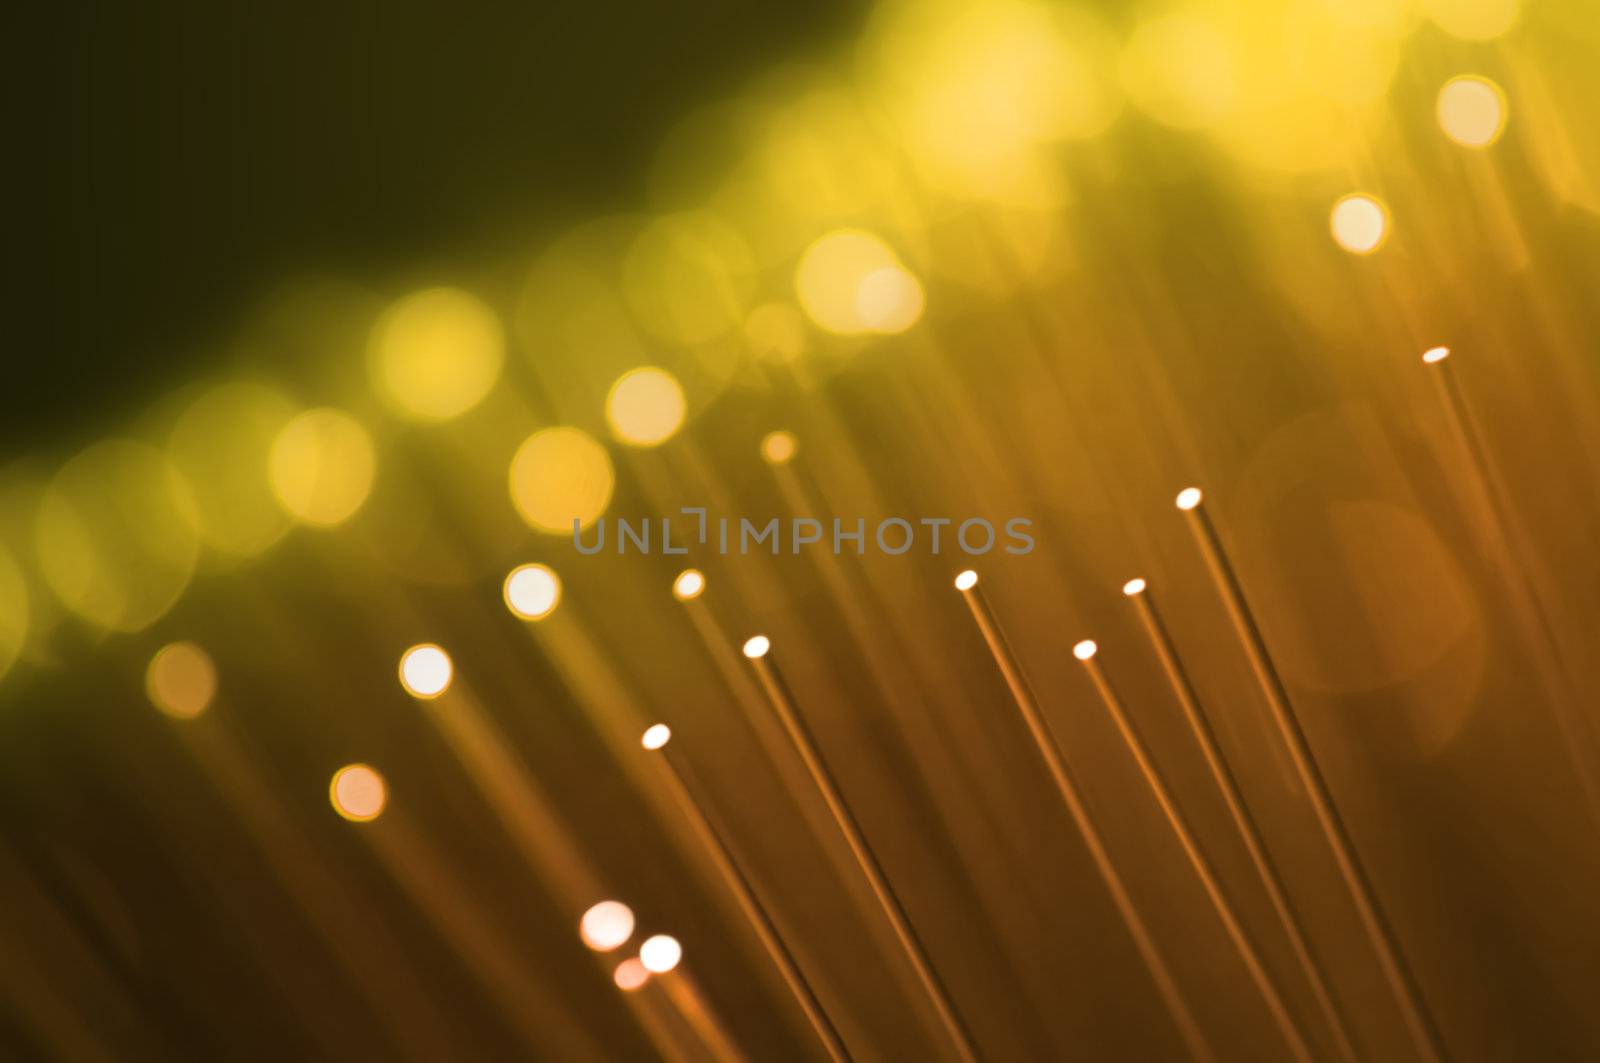 Close up on the ends of many illuminated golden fiber optic strands with dark background. Focus on foreground.